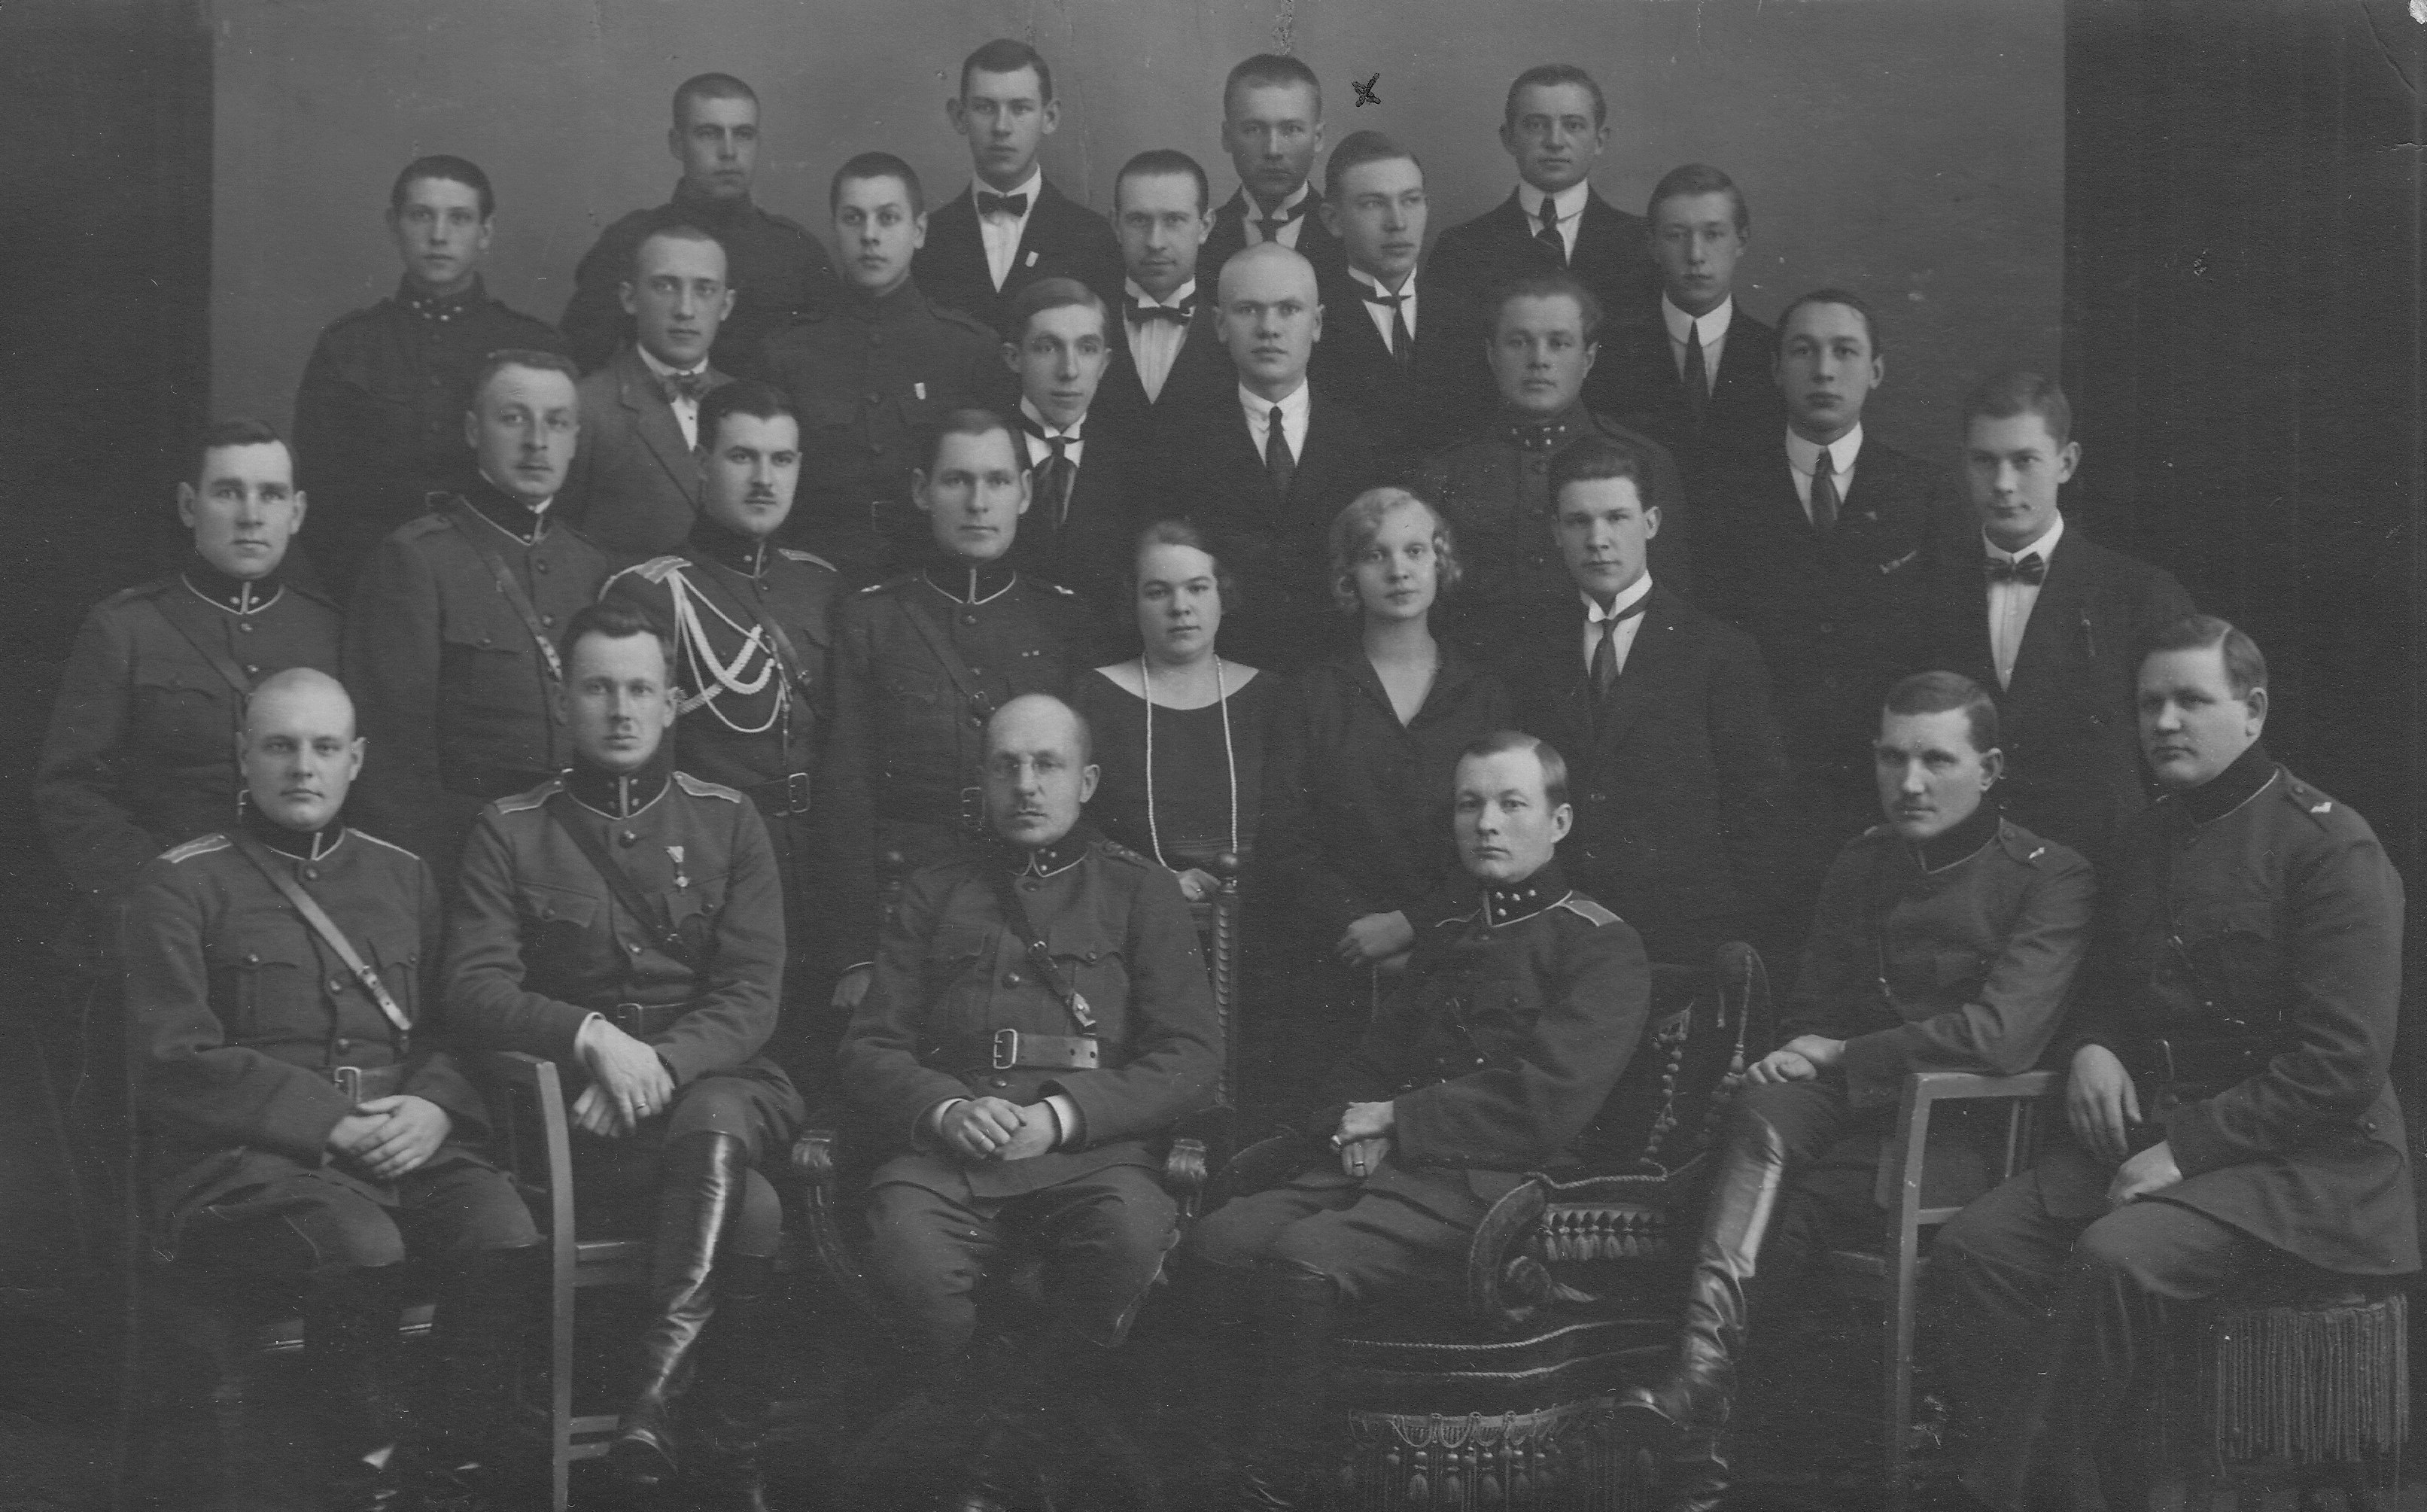 On the Ist of the Twenties. Unidentified event. Young men associated with the War of Independence